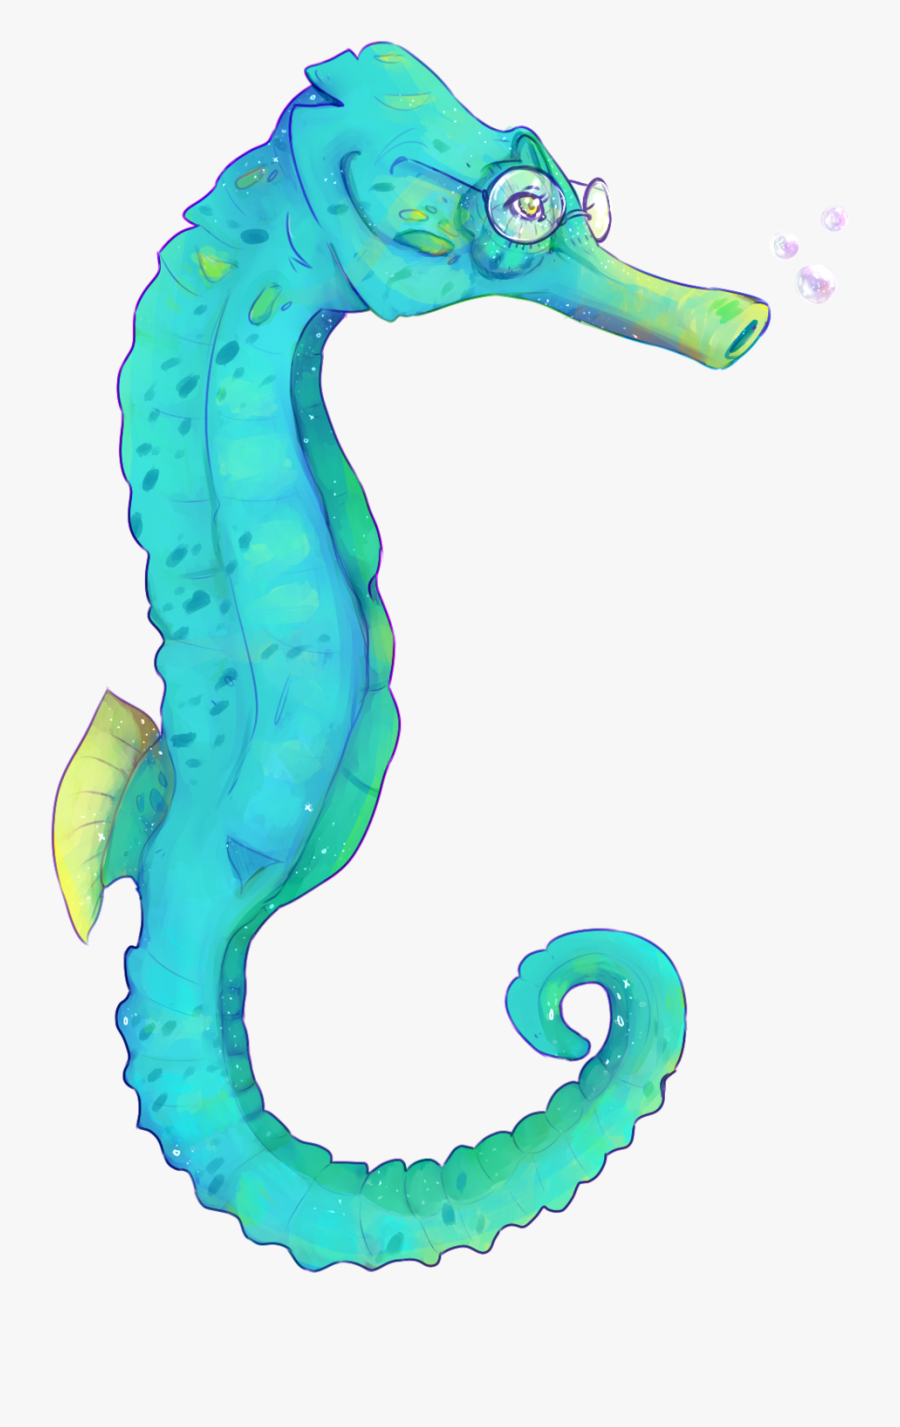 Seahorse - Northern Seahorse, Transparent Clipart